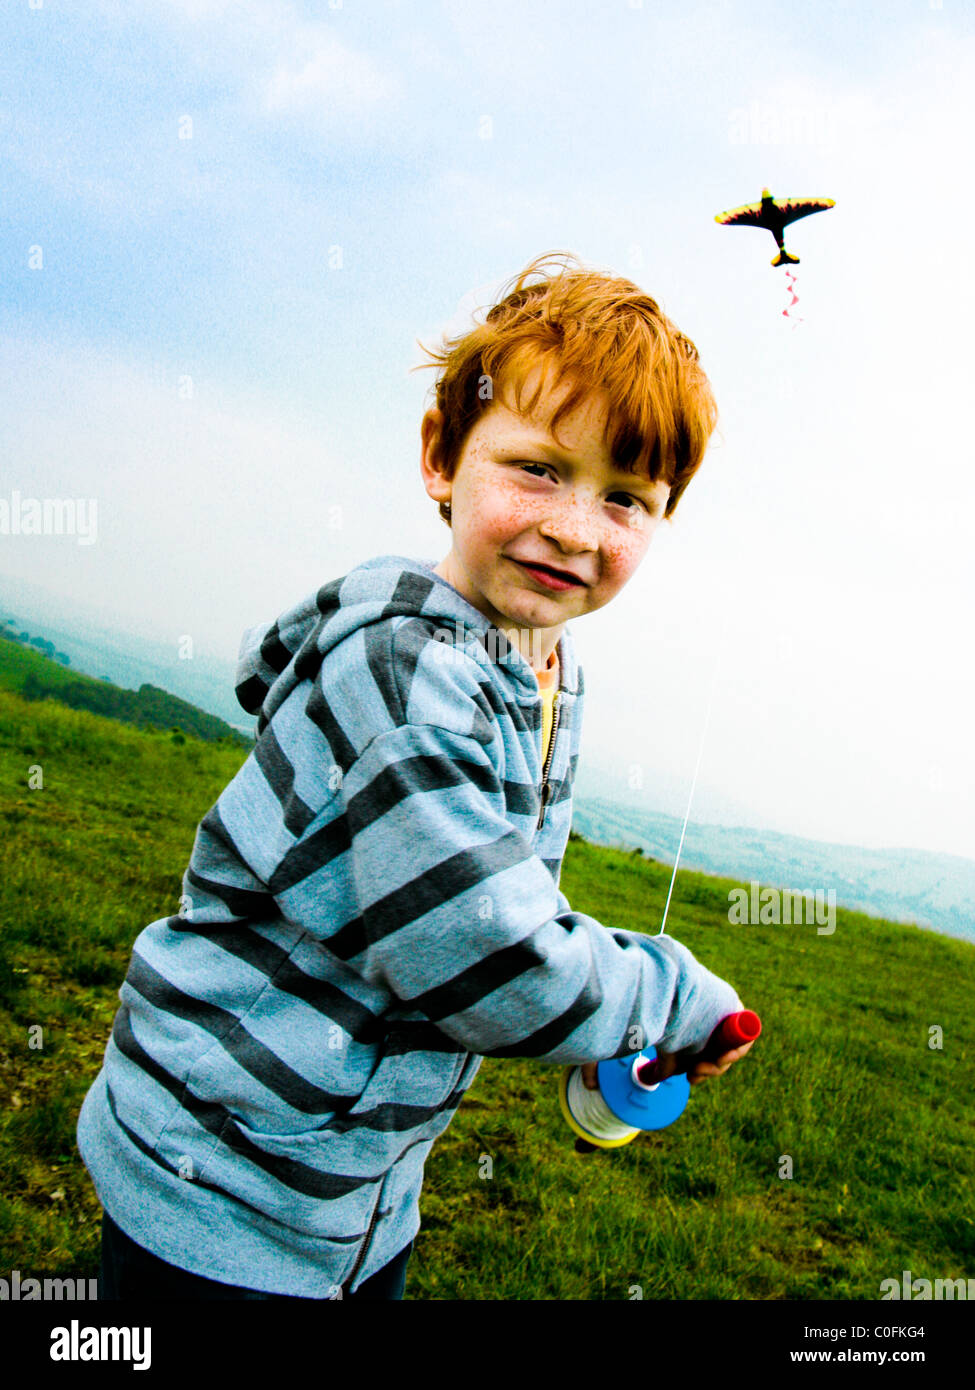 Small boy on a hill top in South Wales UK running in the wind and flying a kite Stock Photo